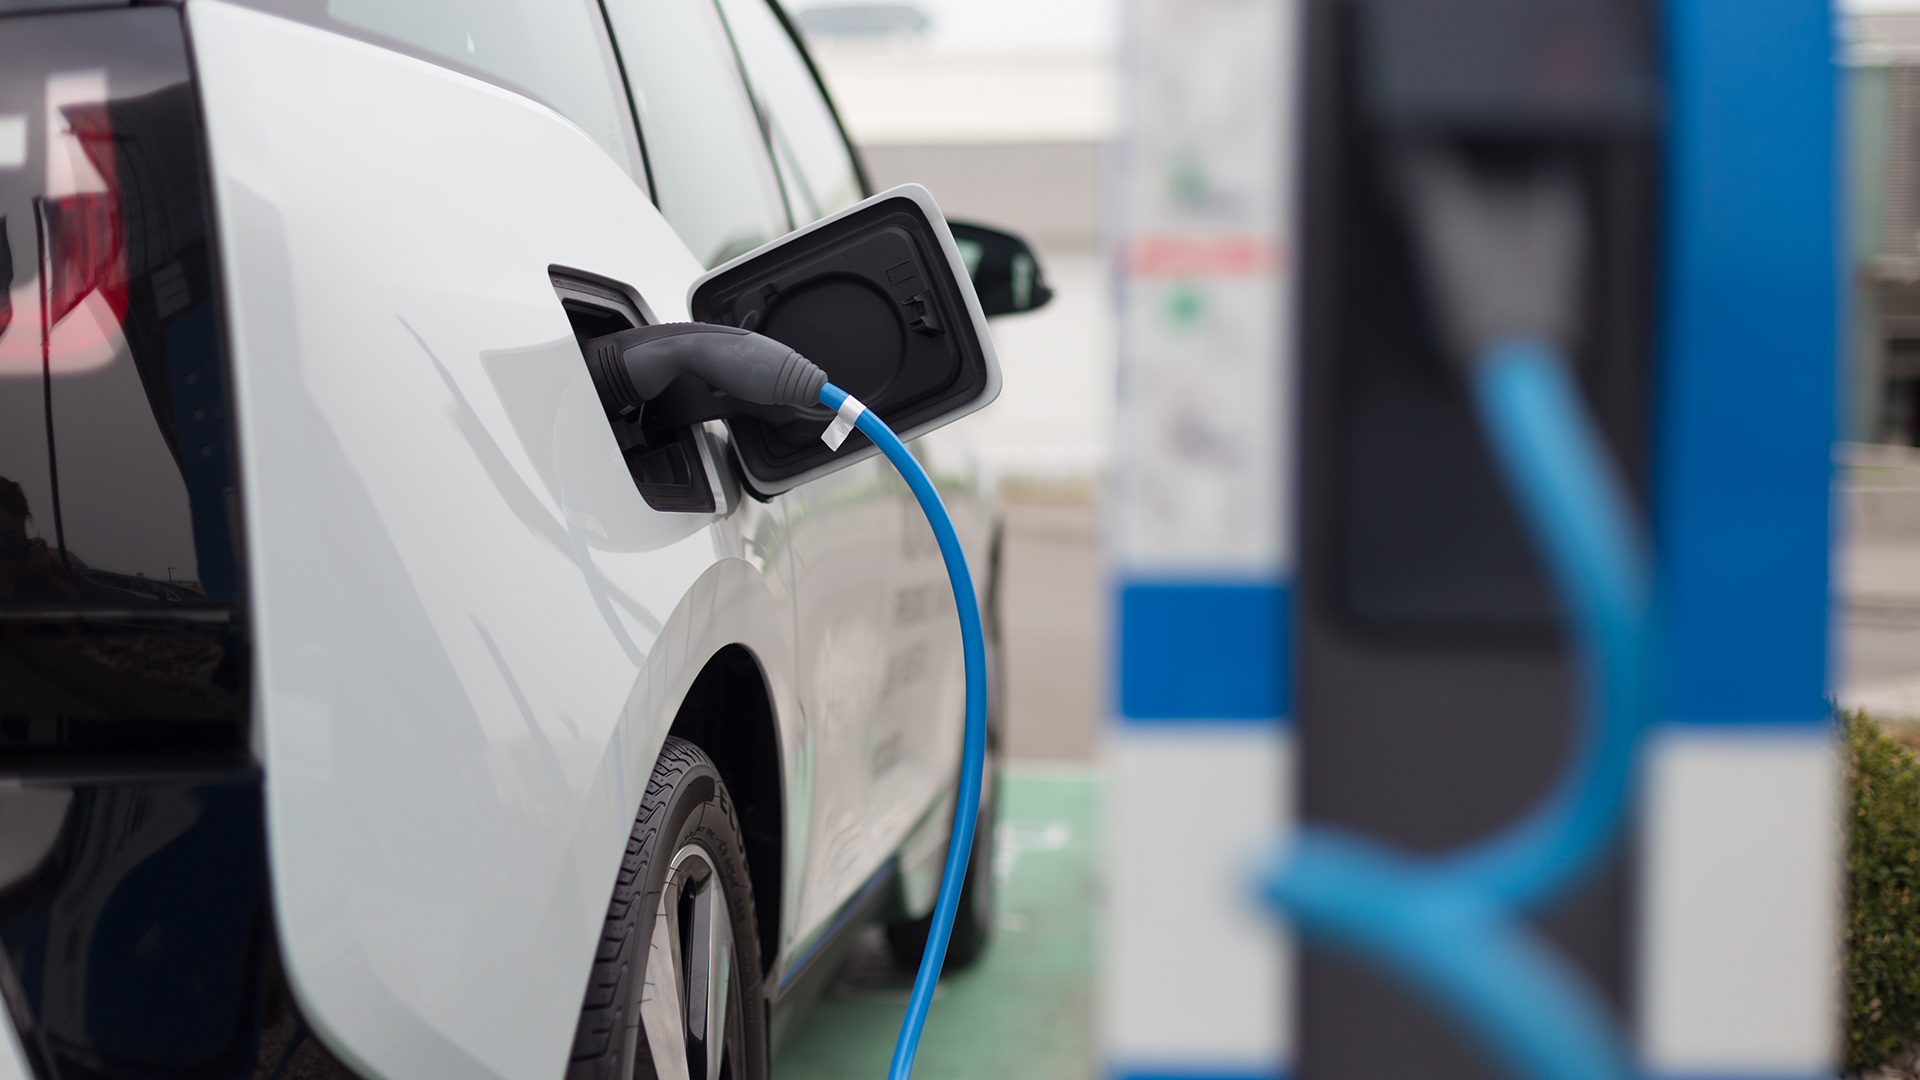 How electric vehicles are transforming the power sector